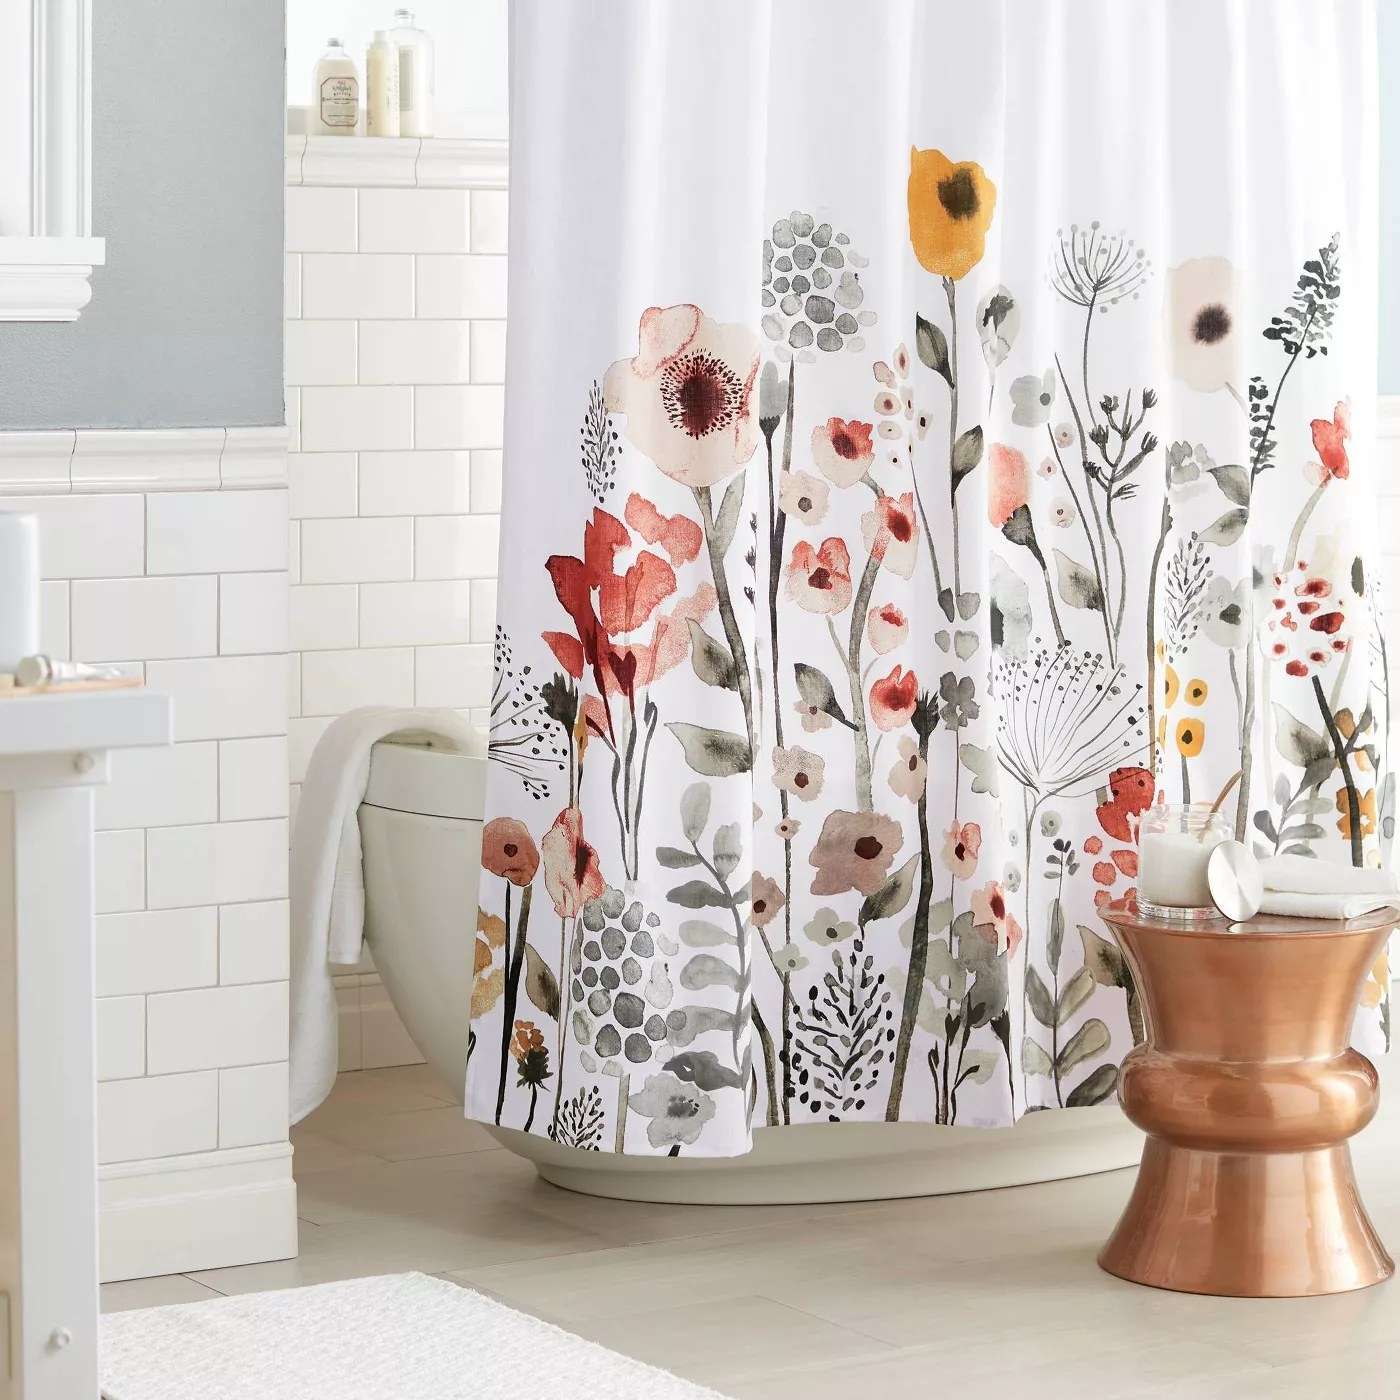 The white shower curtain has a bright watercolor floral pattern climbing up from the bottom